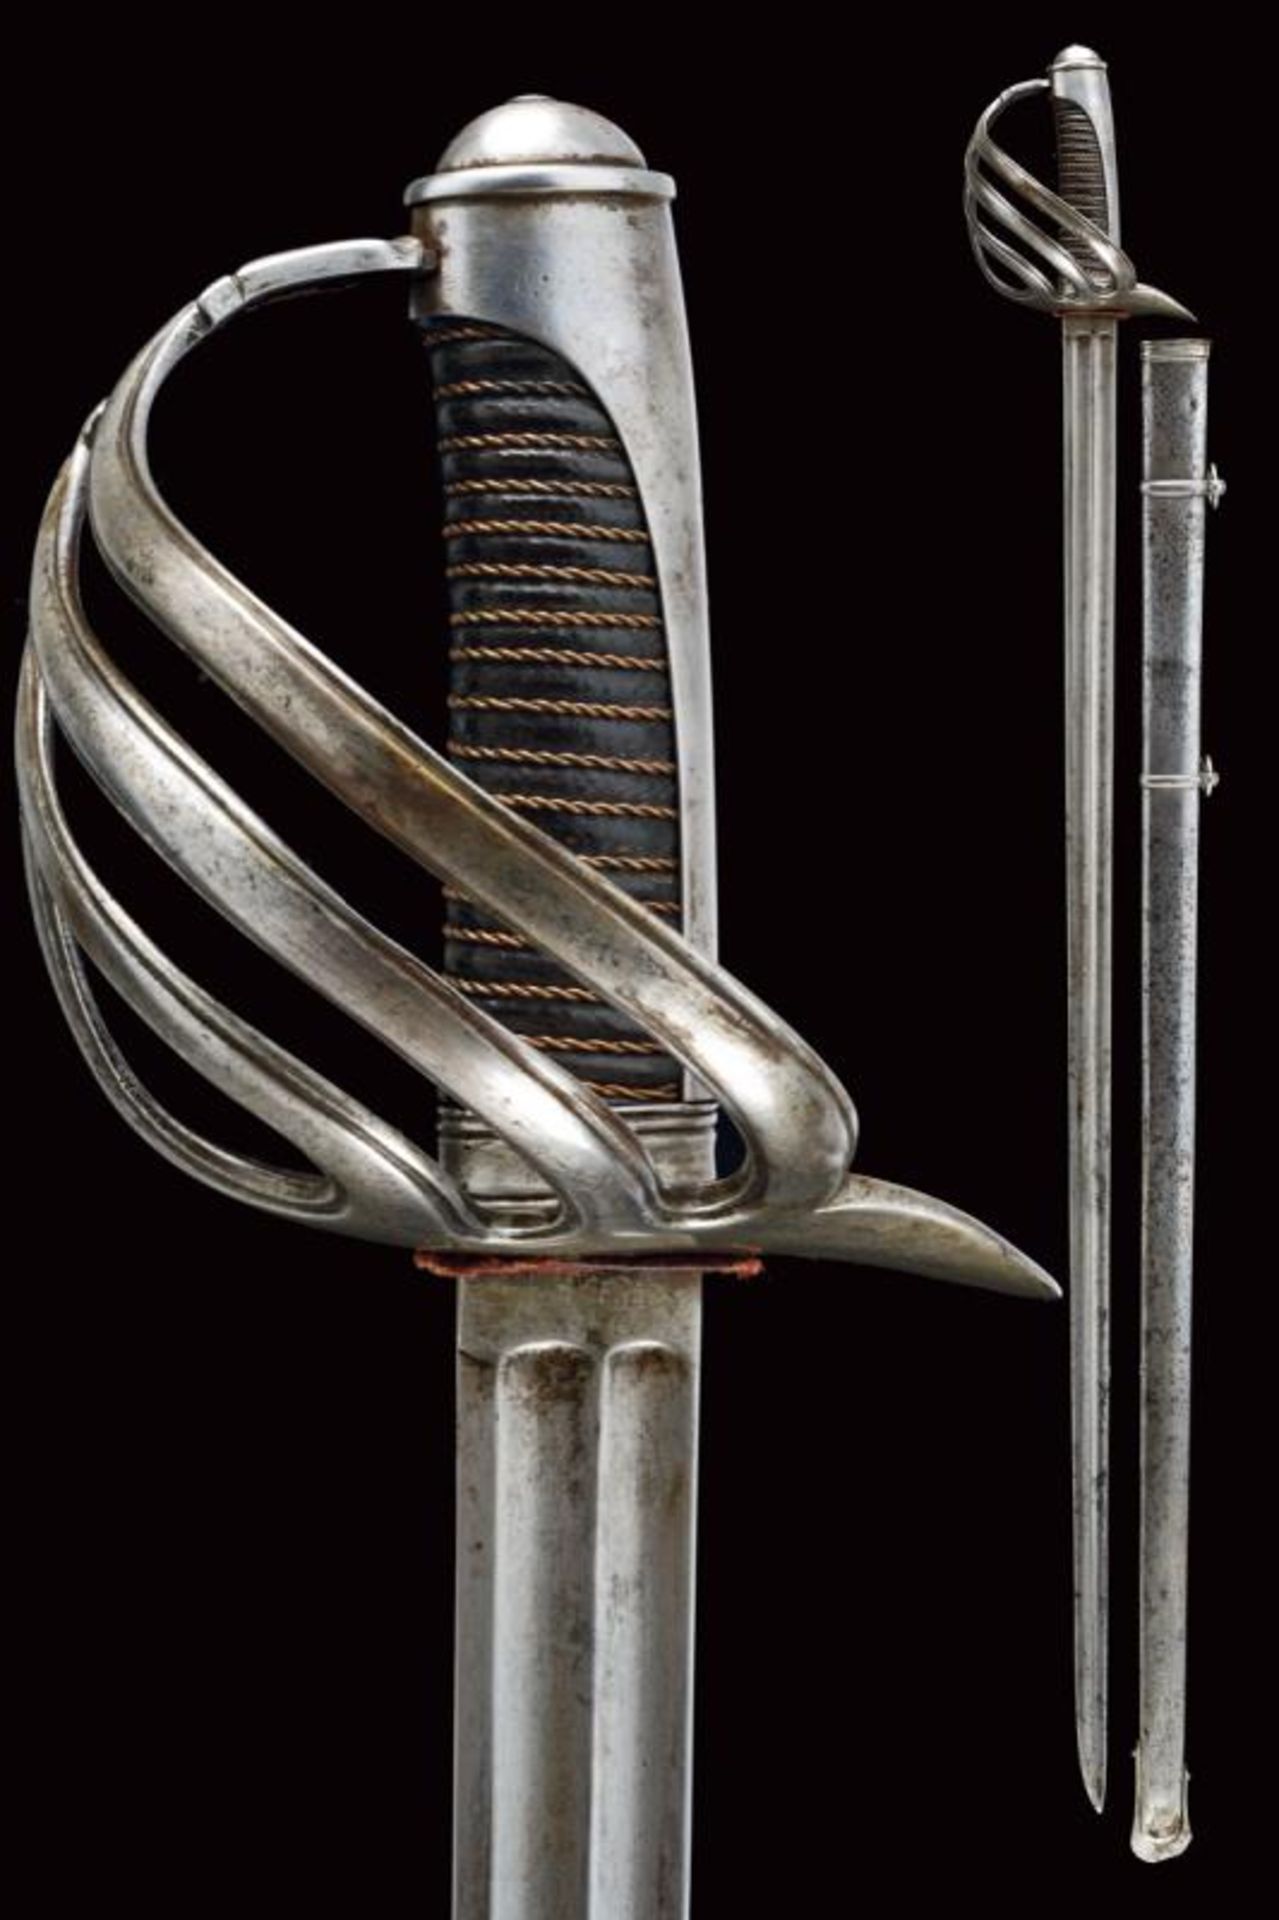 A non-regulation sabre for an officer of the Royal Piedmont Regiment